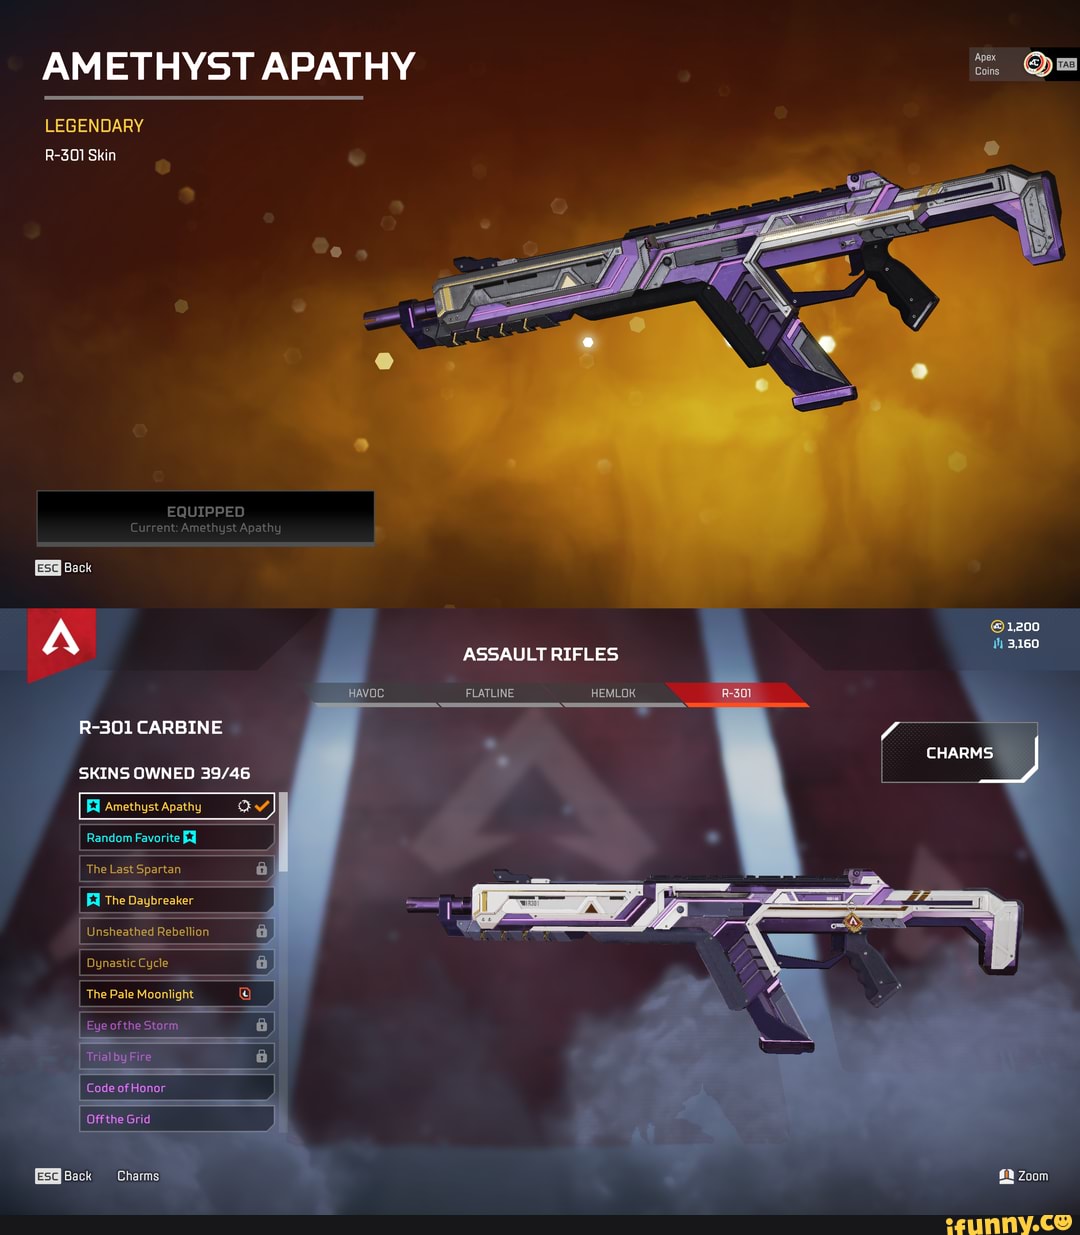 Amethyst Apathy Oa Legendary R 301 Skin Equipped Current Amethyst Apathy Back 10 Assault Rifles 3160